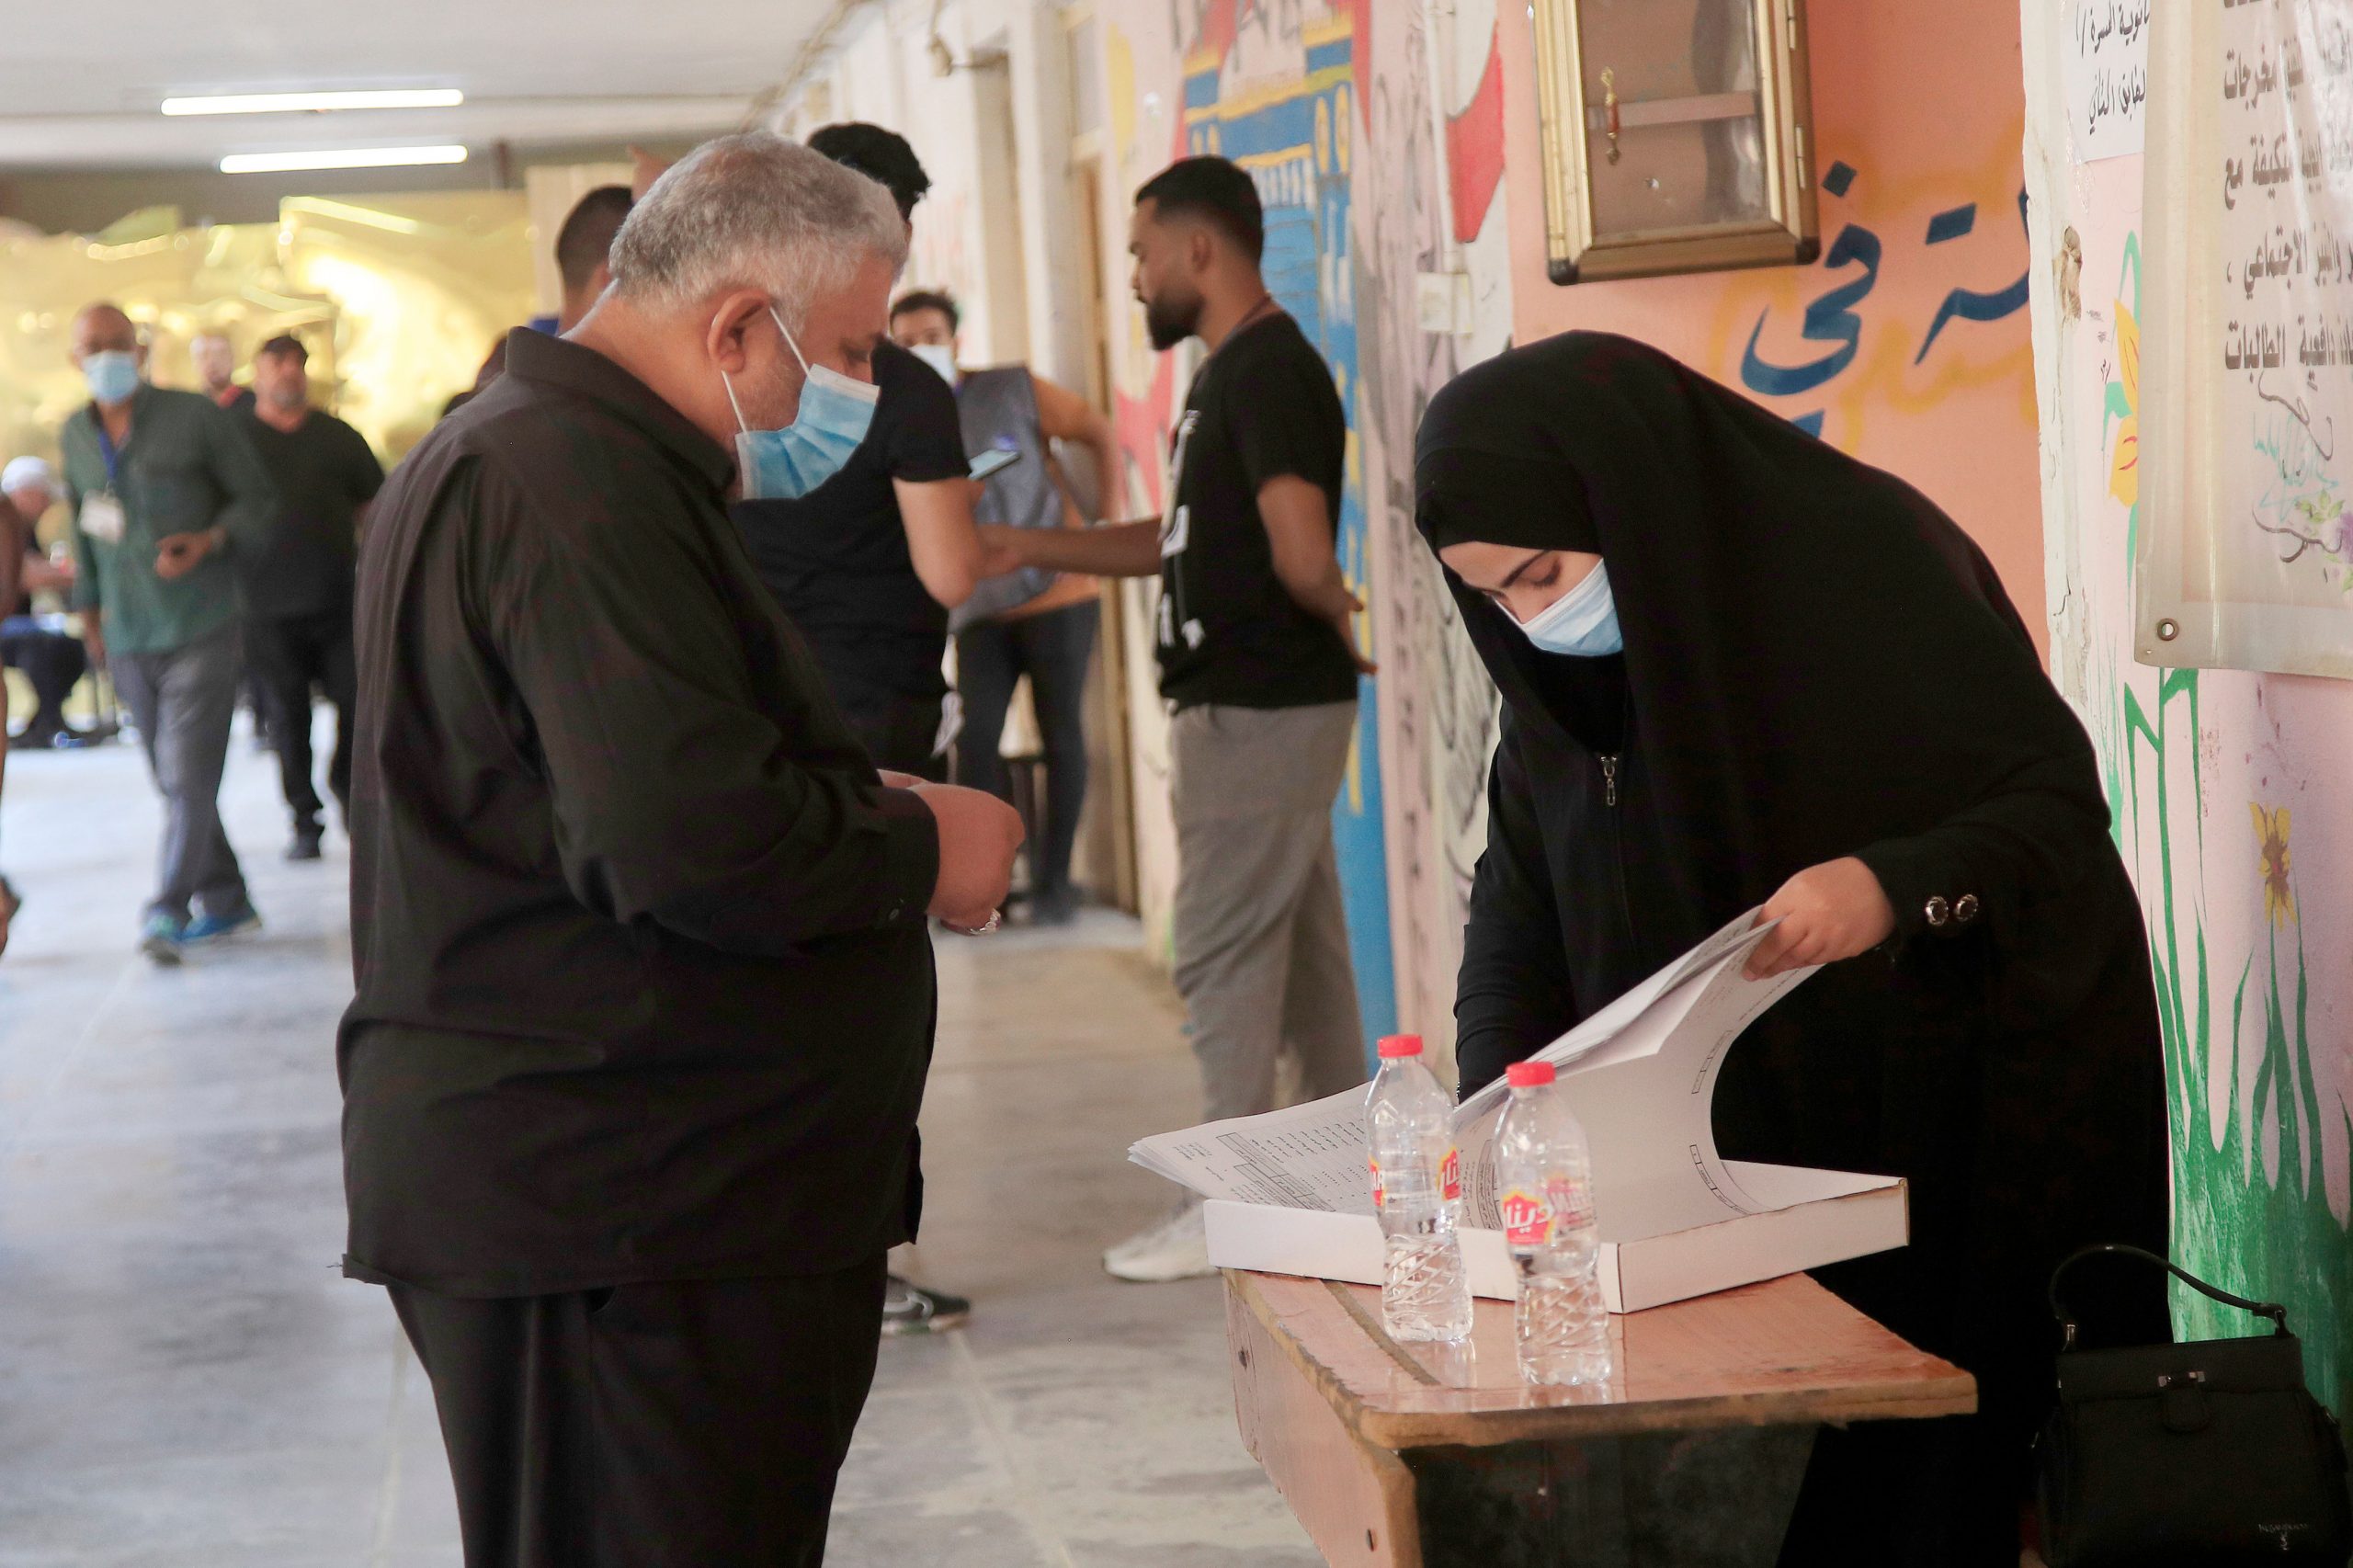 Iraqis vote for new parliament hoping for change